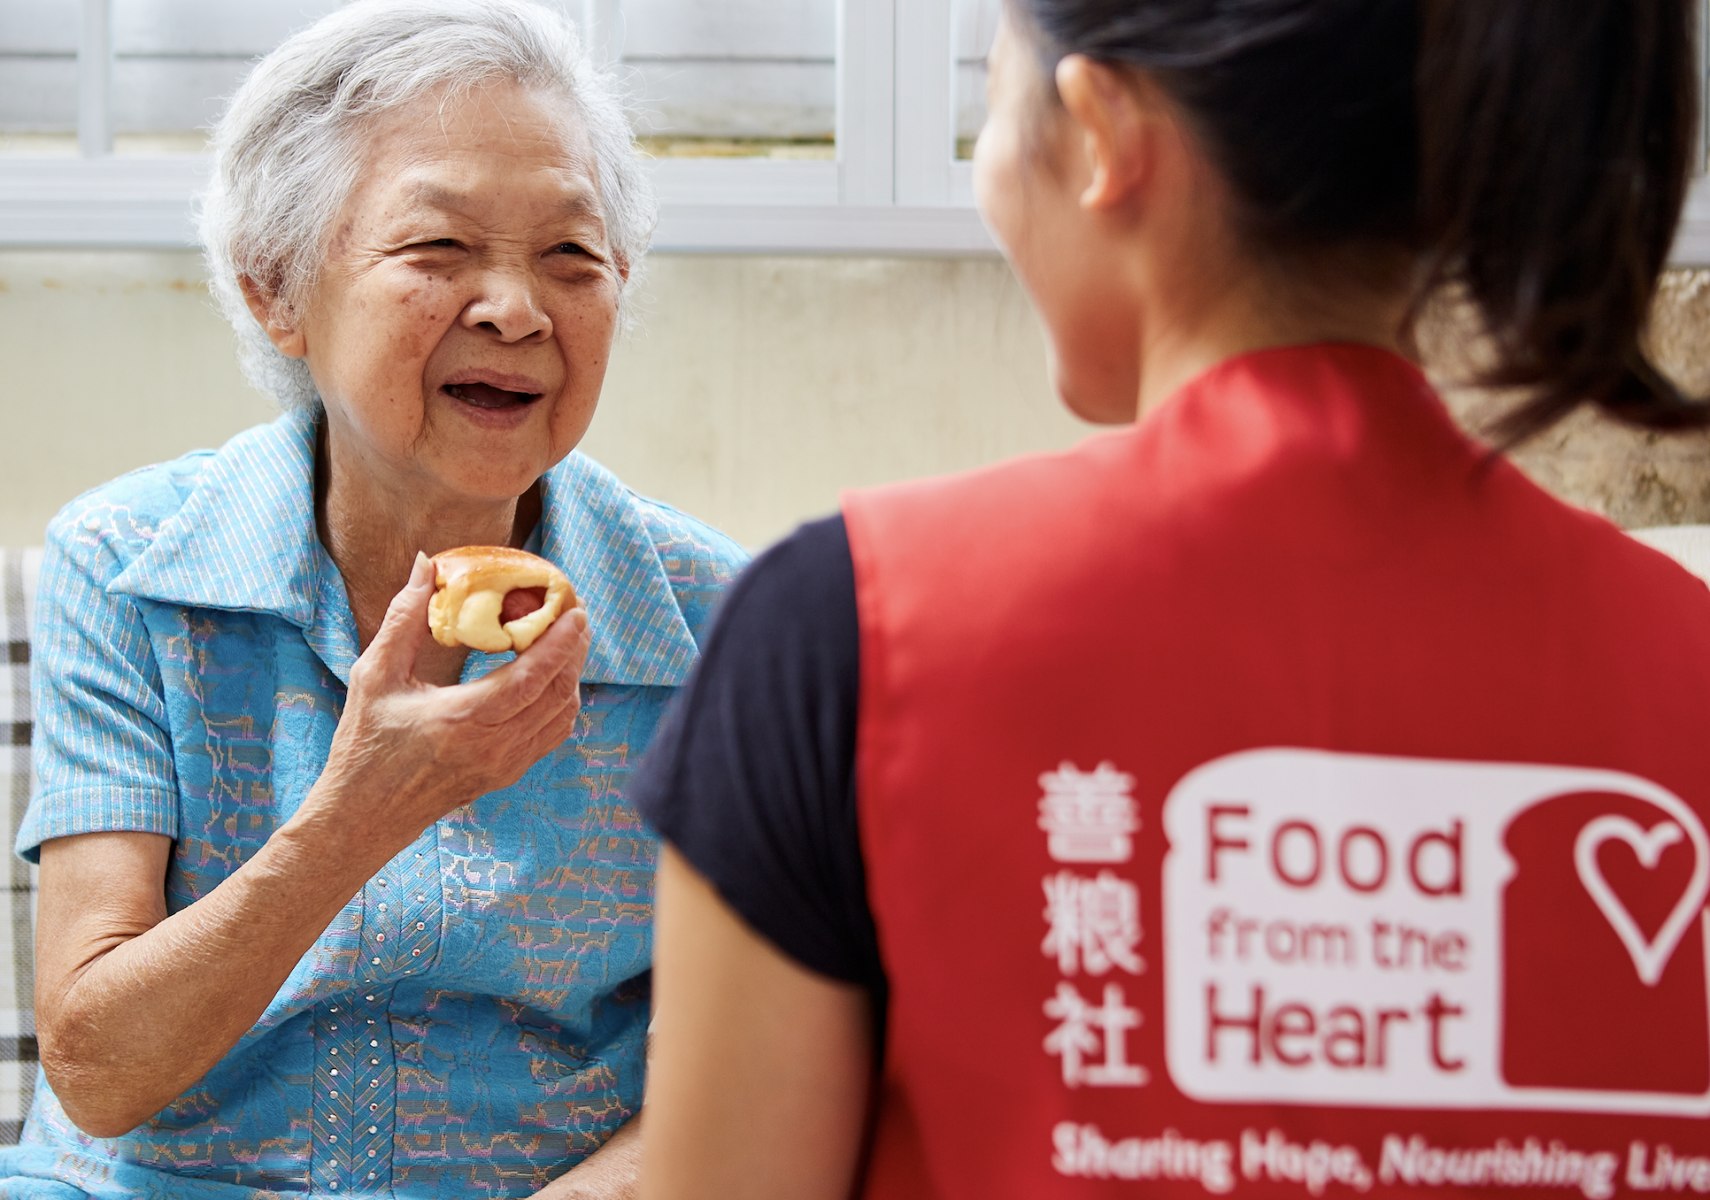 How Food from the Heart benefits from working with corporate volunteers